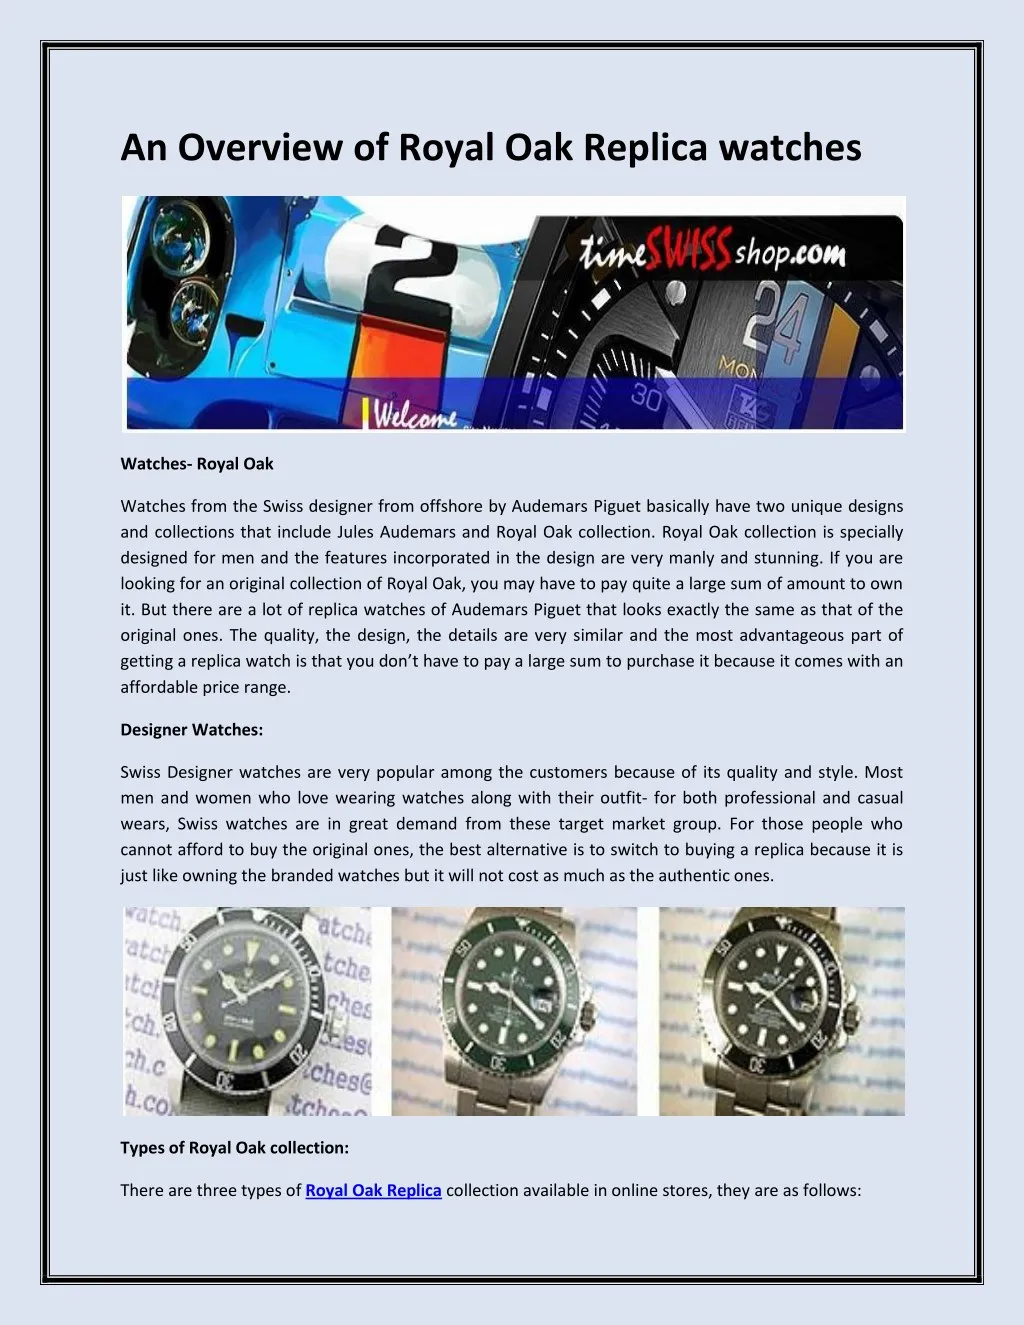 PPT - An Overview of Royal Oak Replica watches PowerPoint Presentation ...